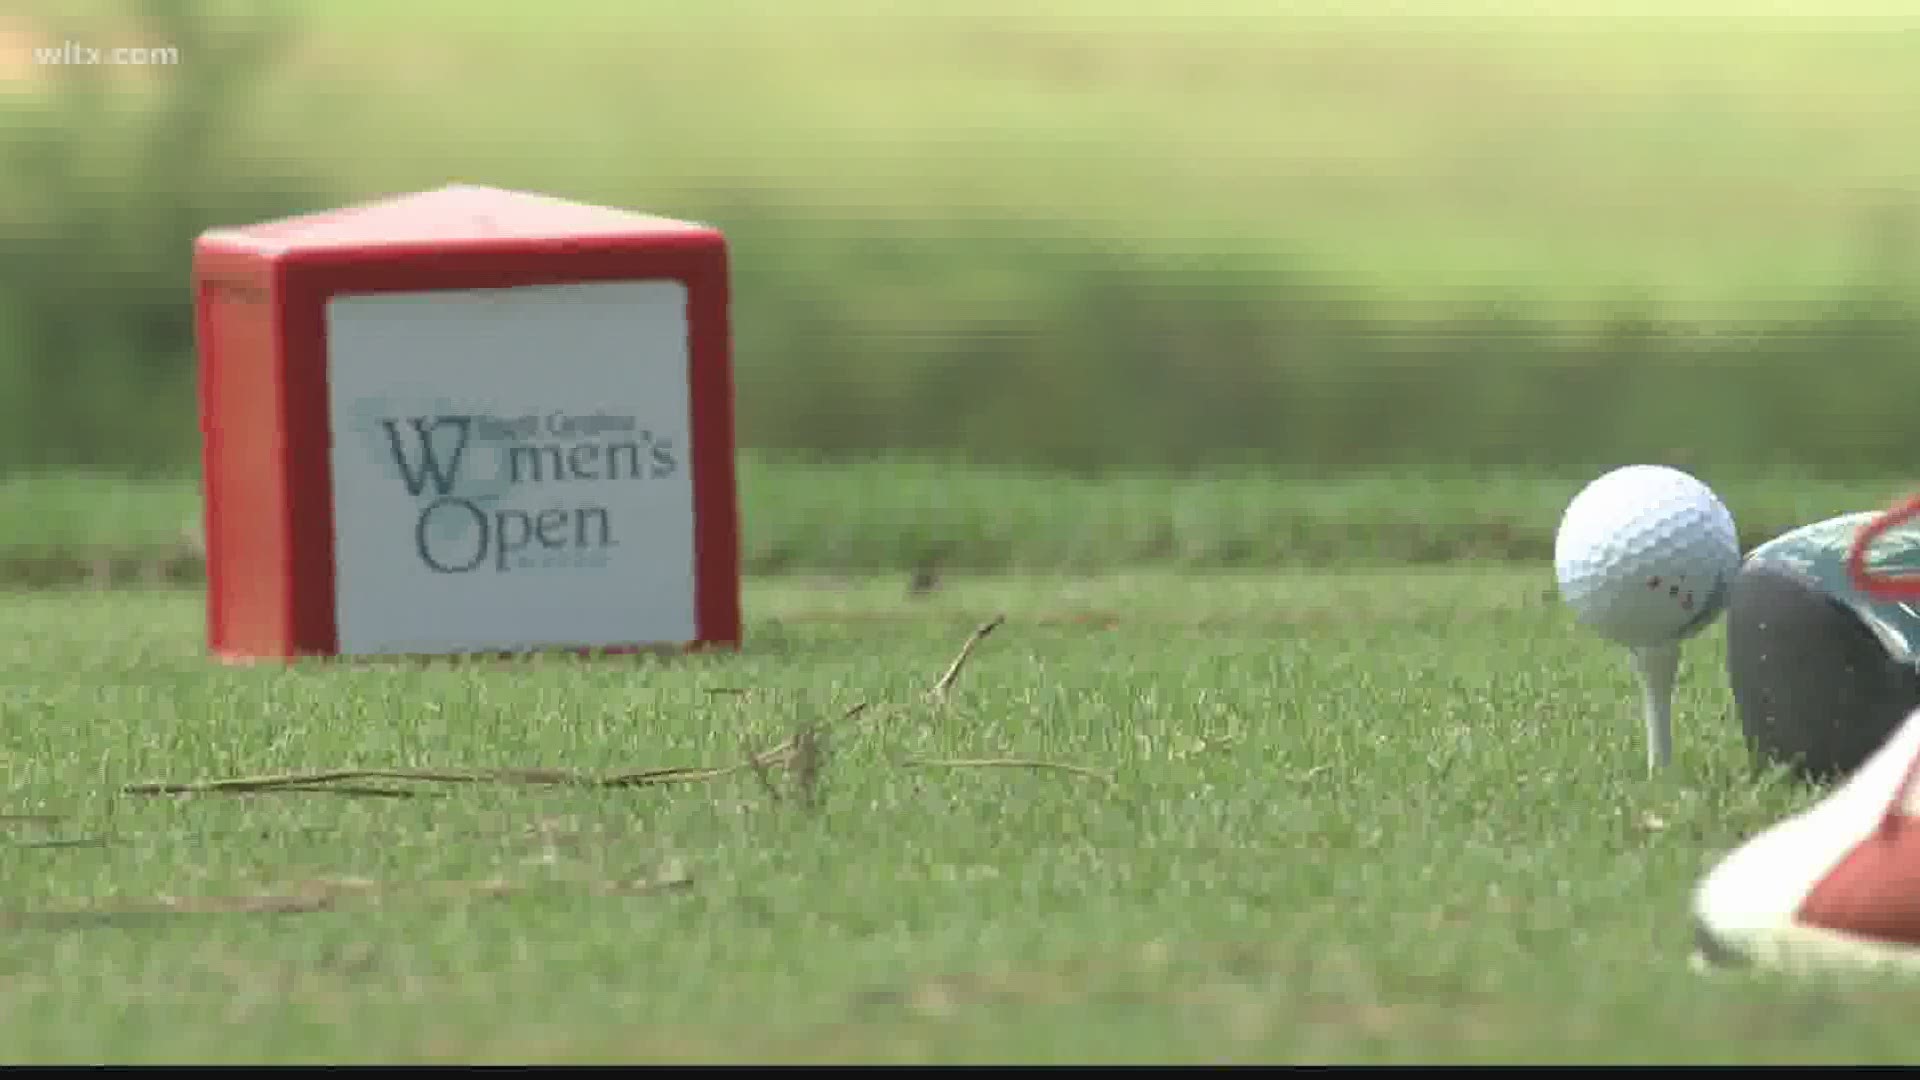 The Cobblestone Park Golf Club in Blythewood is hosting the third annual South Carolina Women's Open.